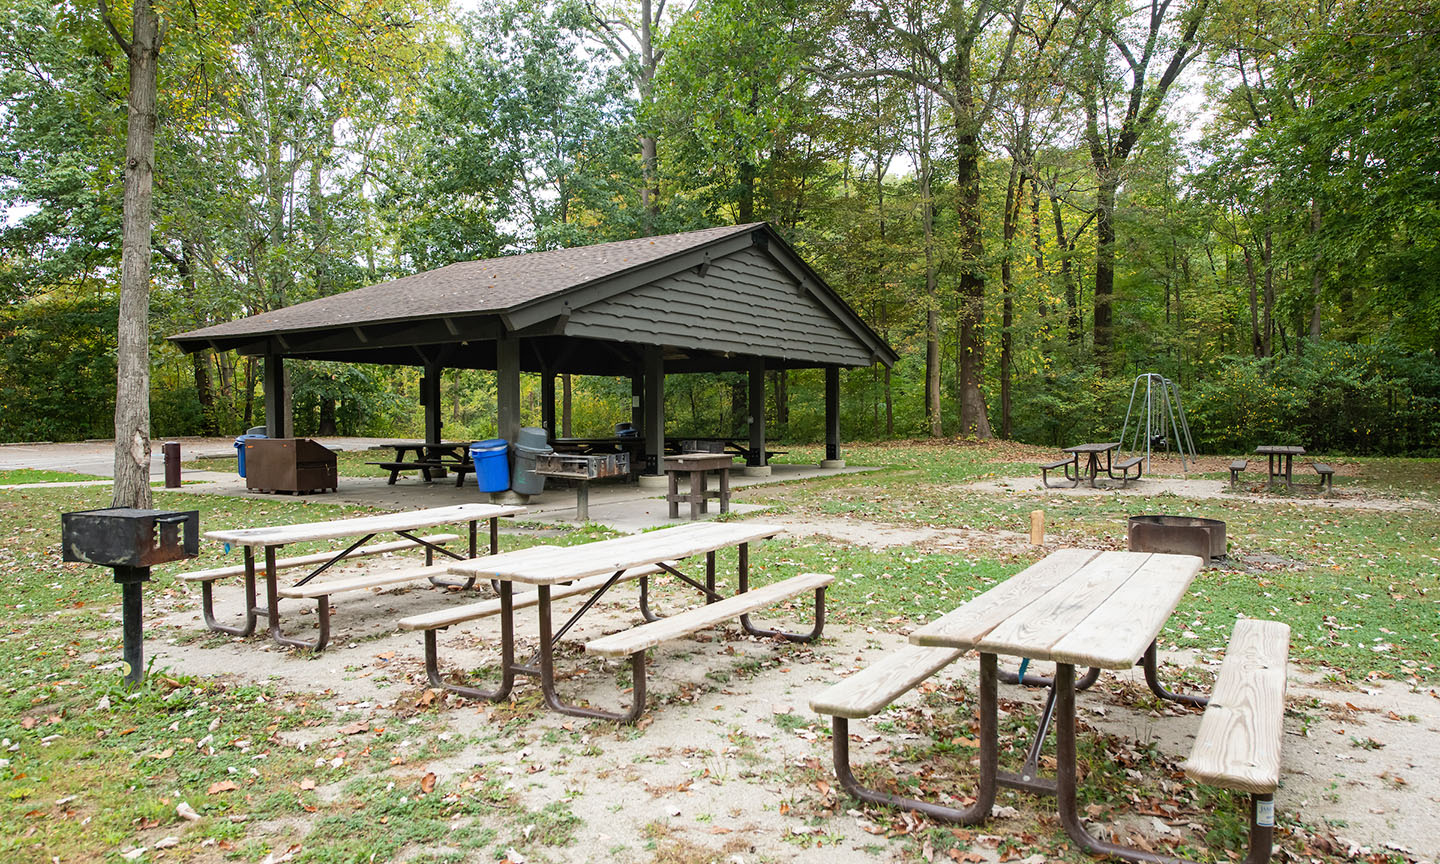 Willow Bend Picnic Area